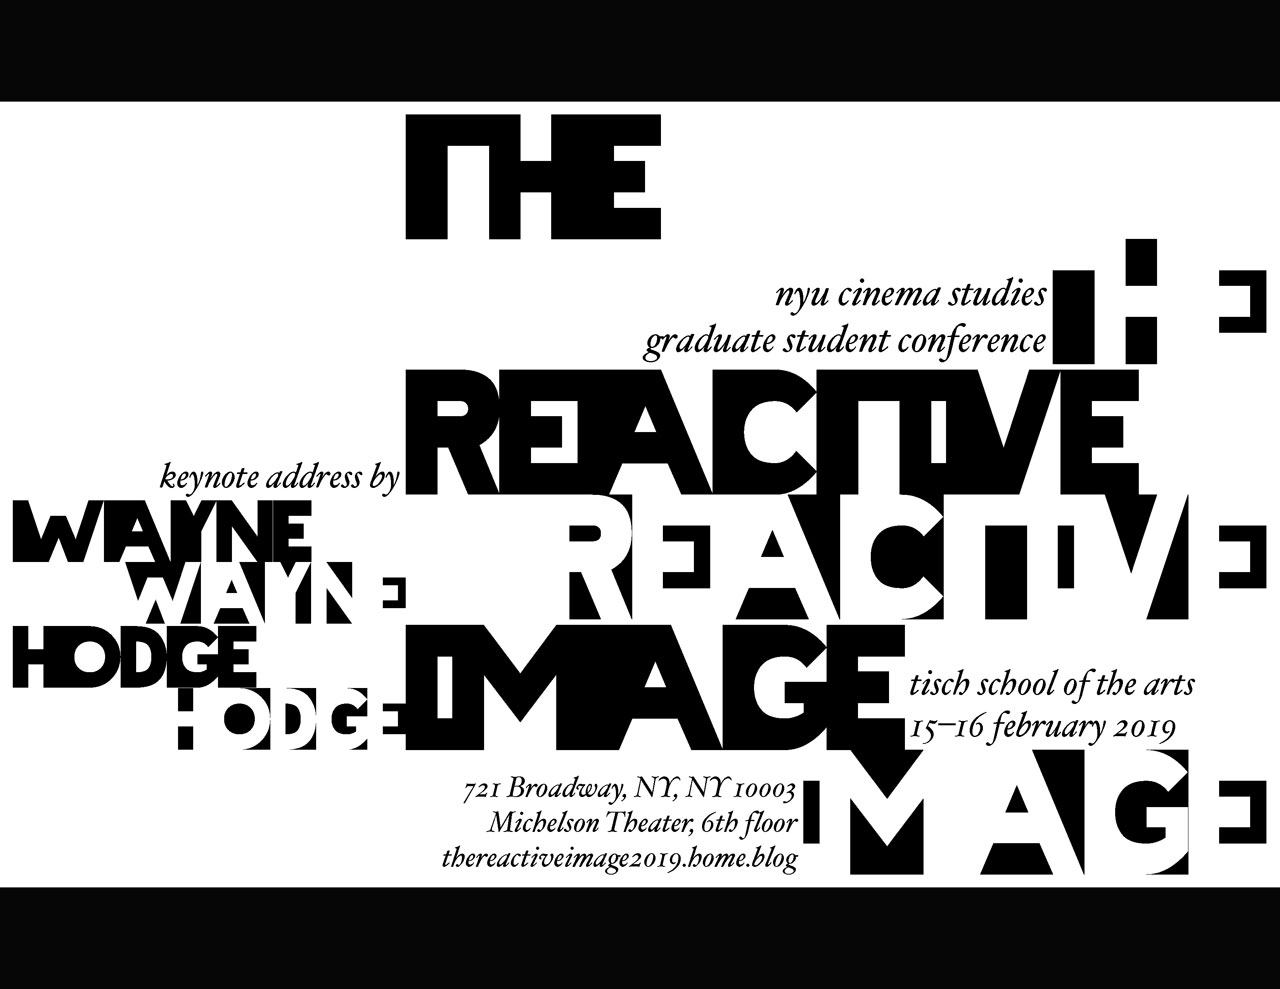 Poster for student conference, The Re/active Image